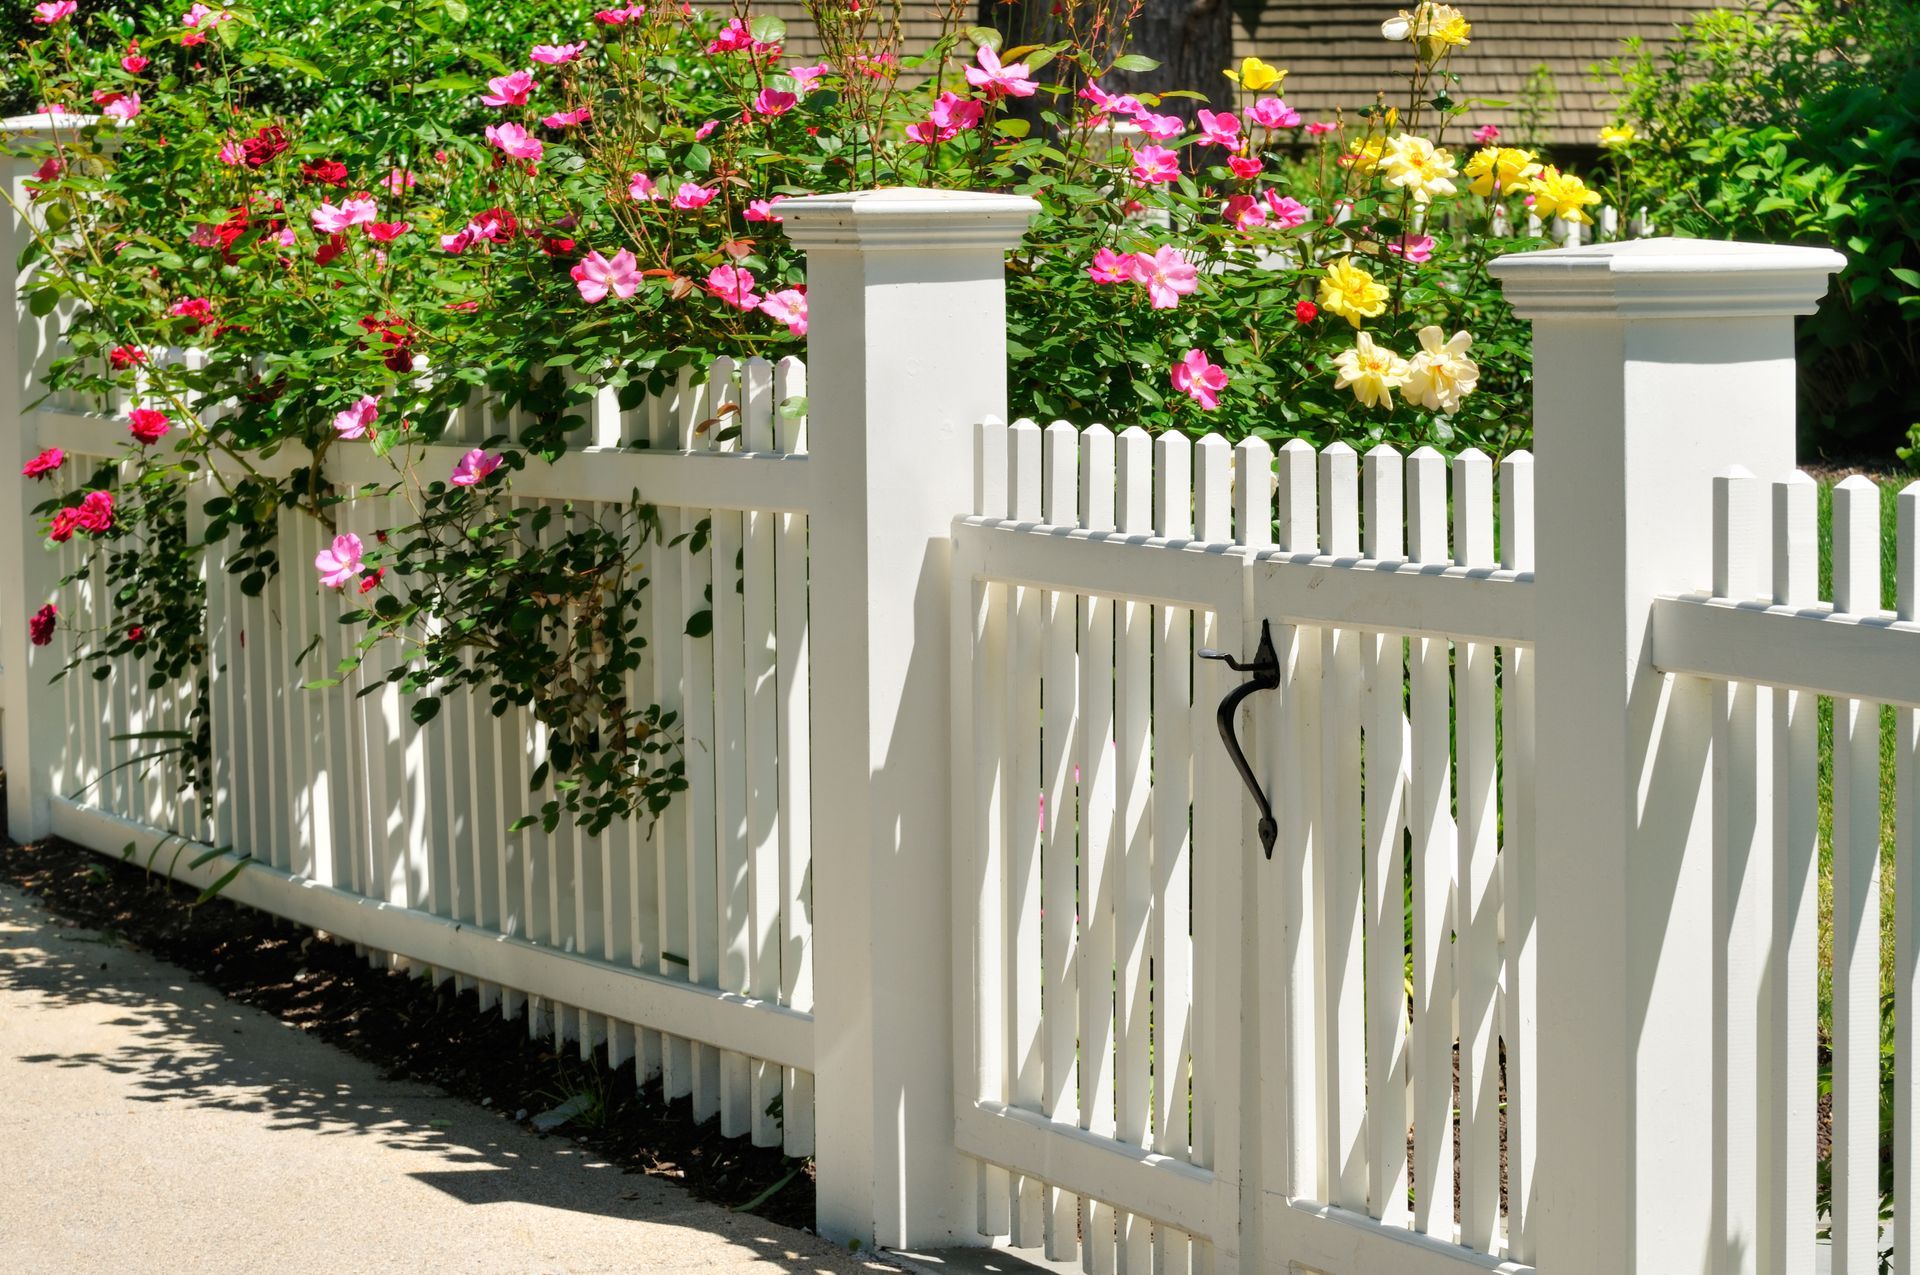 An elegant white gate and fence adorned with vibrant climbing roses in full bloom, creating a picturesque and inviting scene.